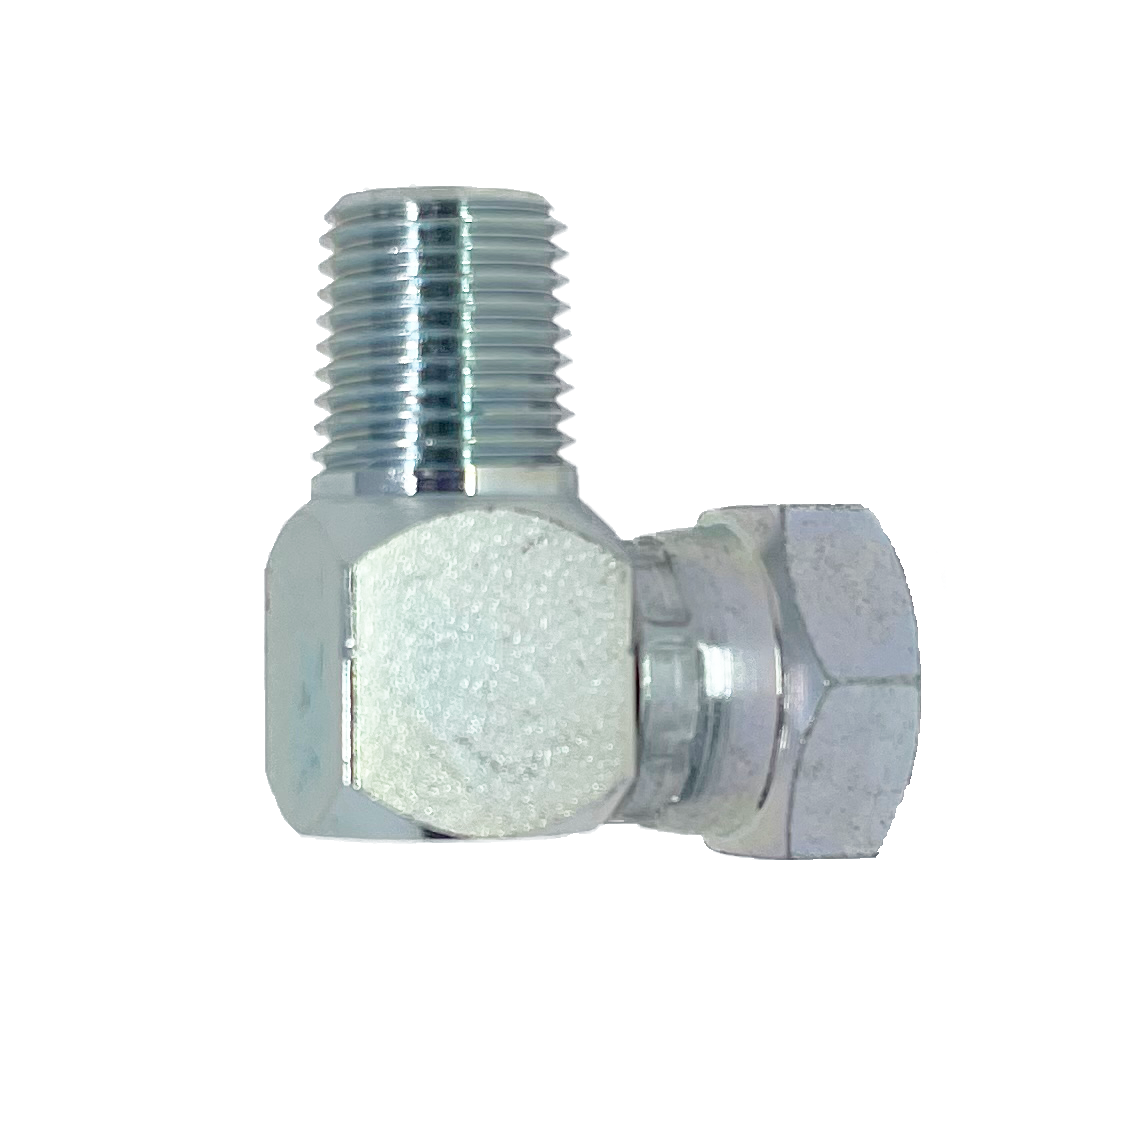 9072-24-24 : Adaptall 90-Degree  Adapter, Male 1.5 (1-1/2") NPT x Female 1.5 (1-1/2") BSPP, Carbon Steel